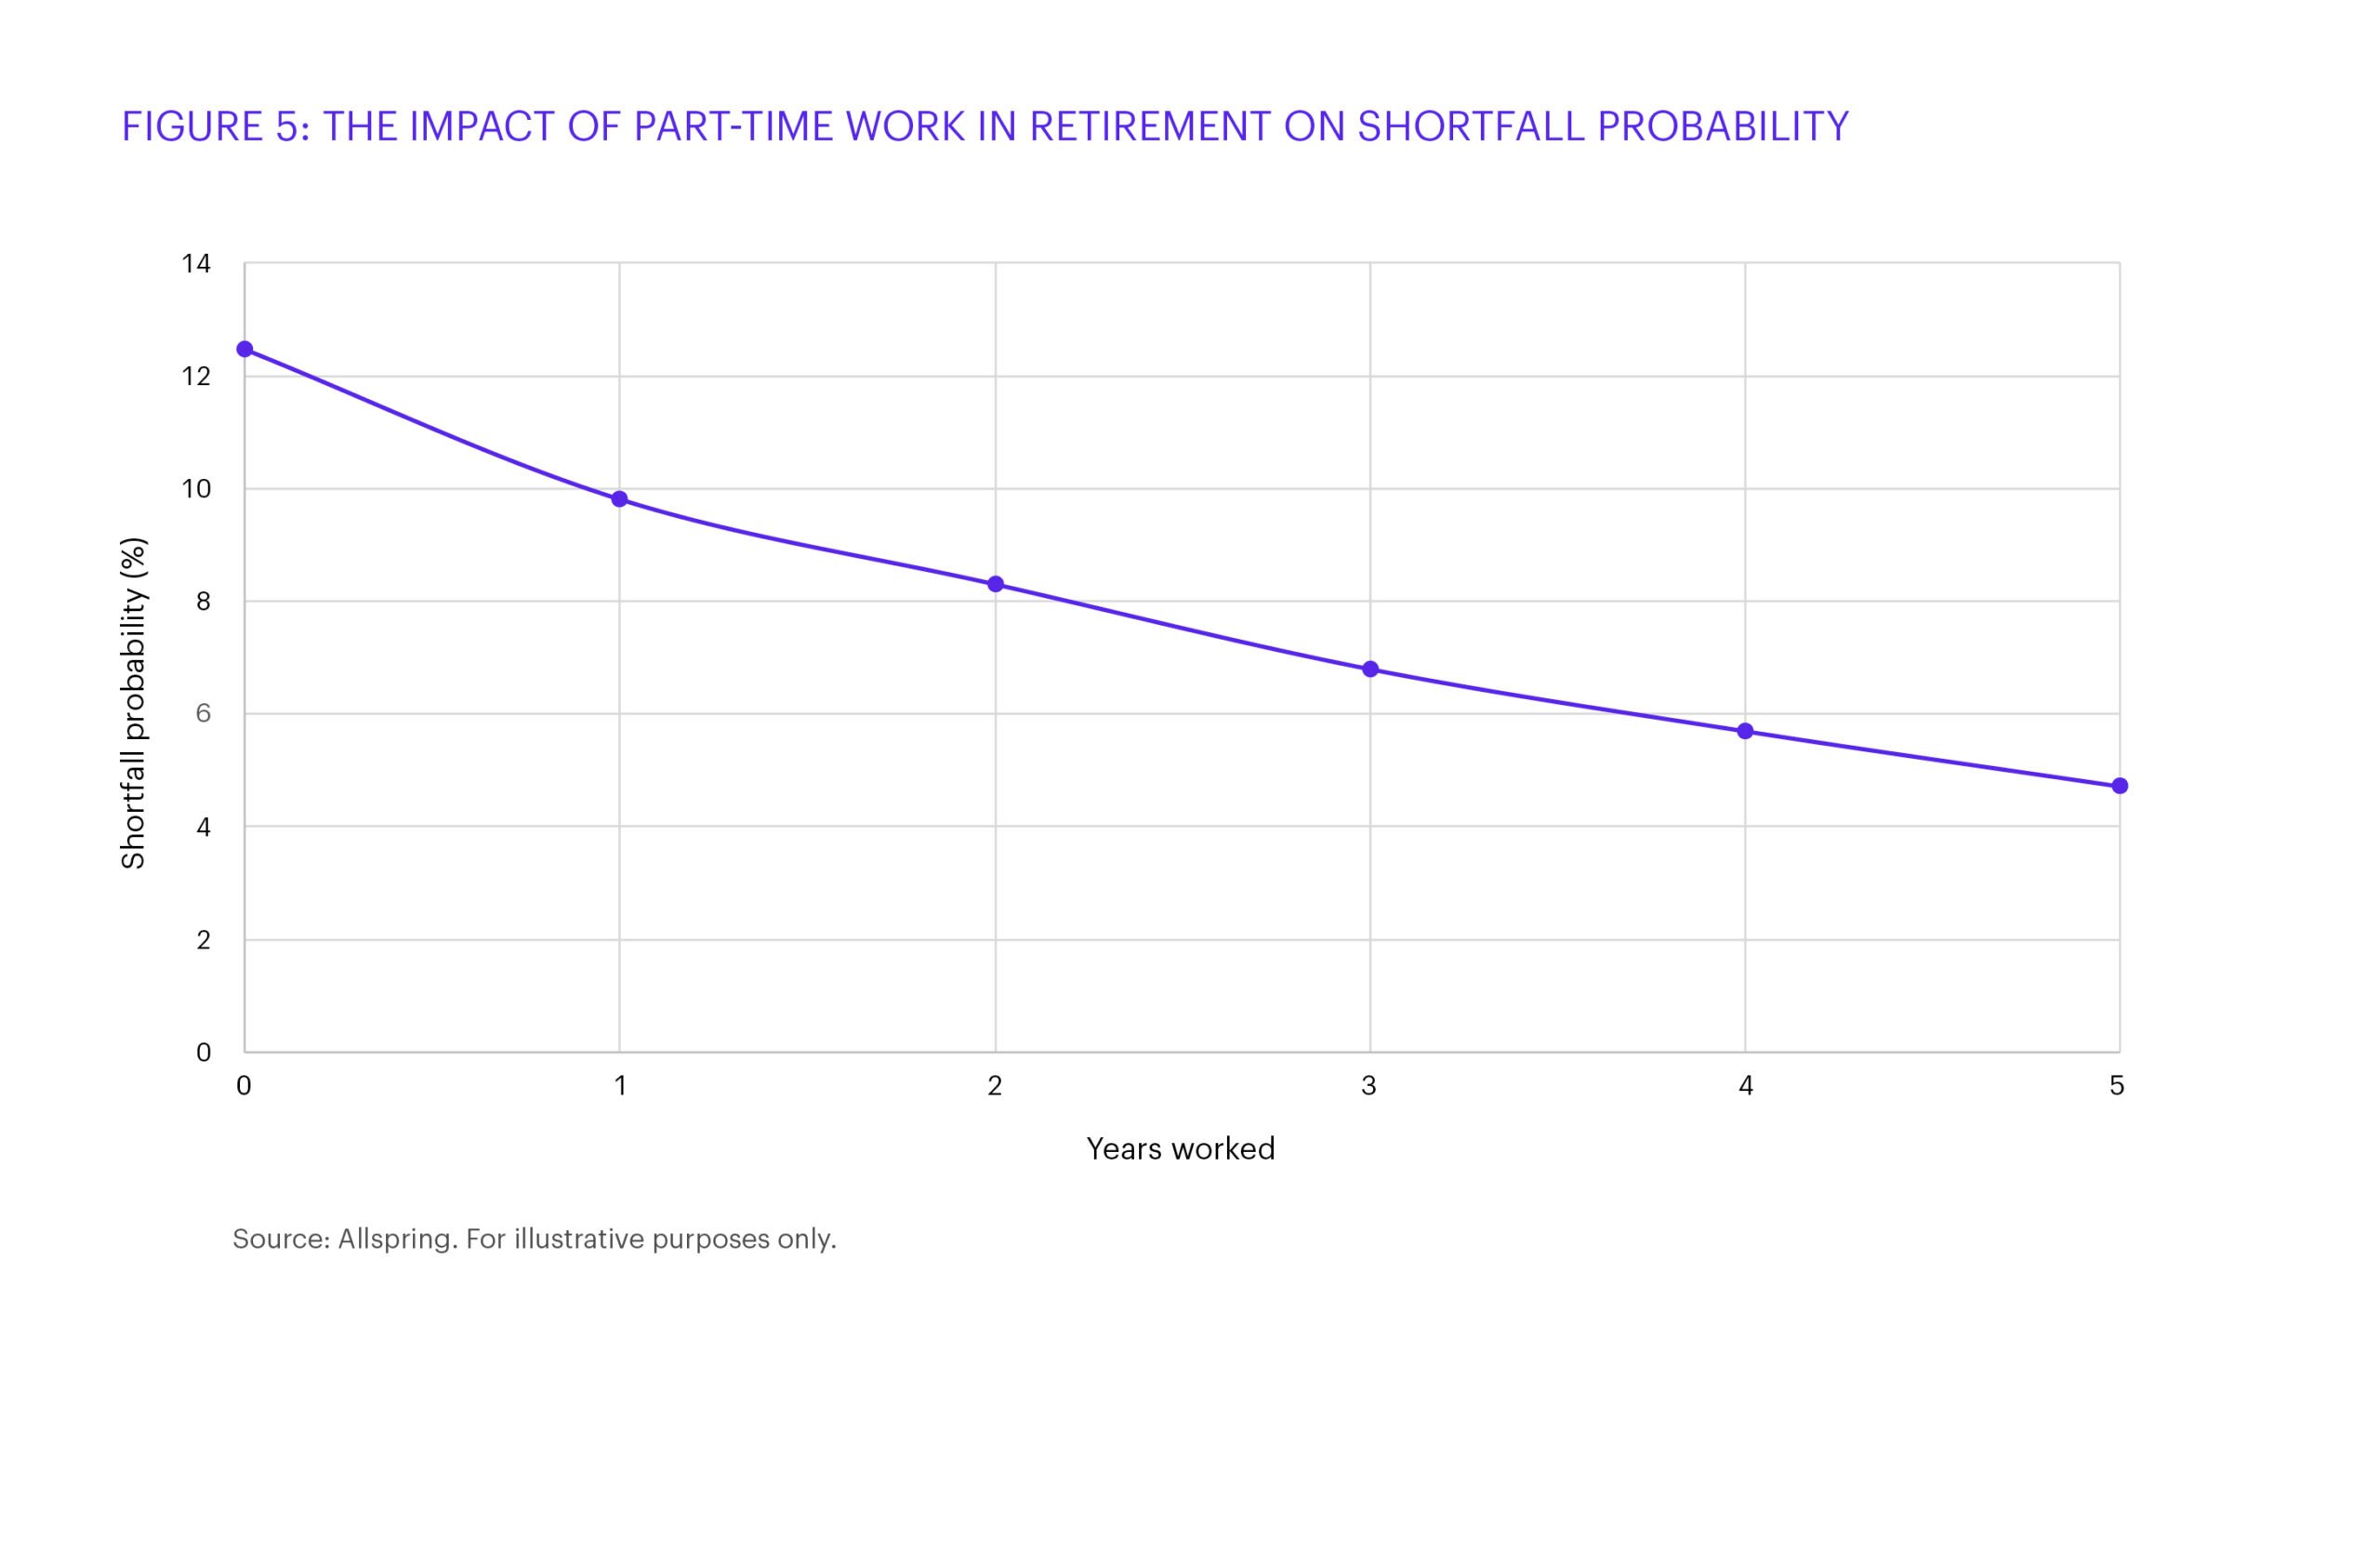 This chart shows the impact of part-time work in retirement on shortfall probability.